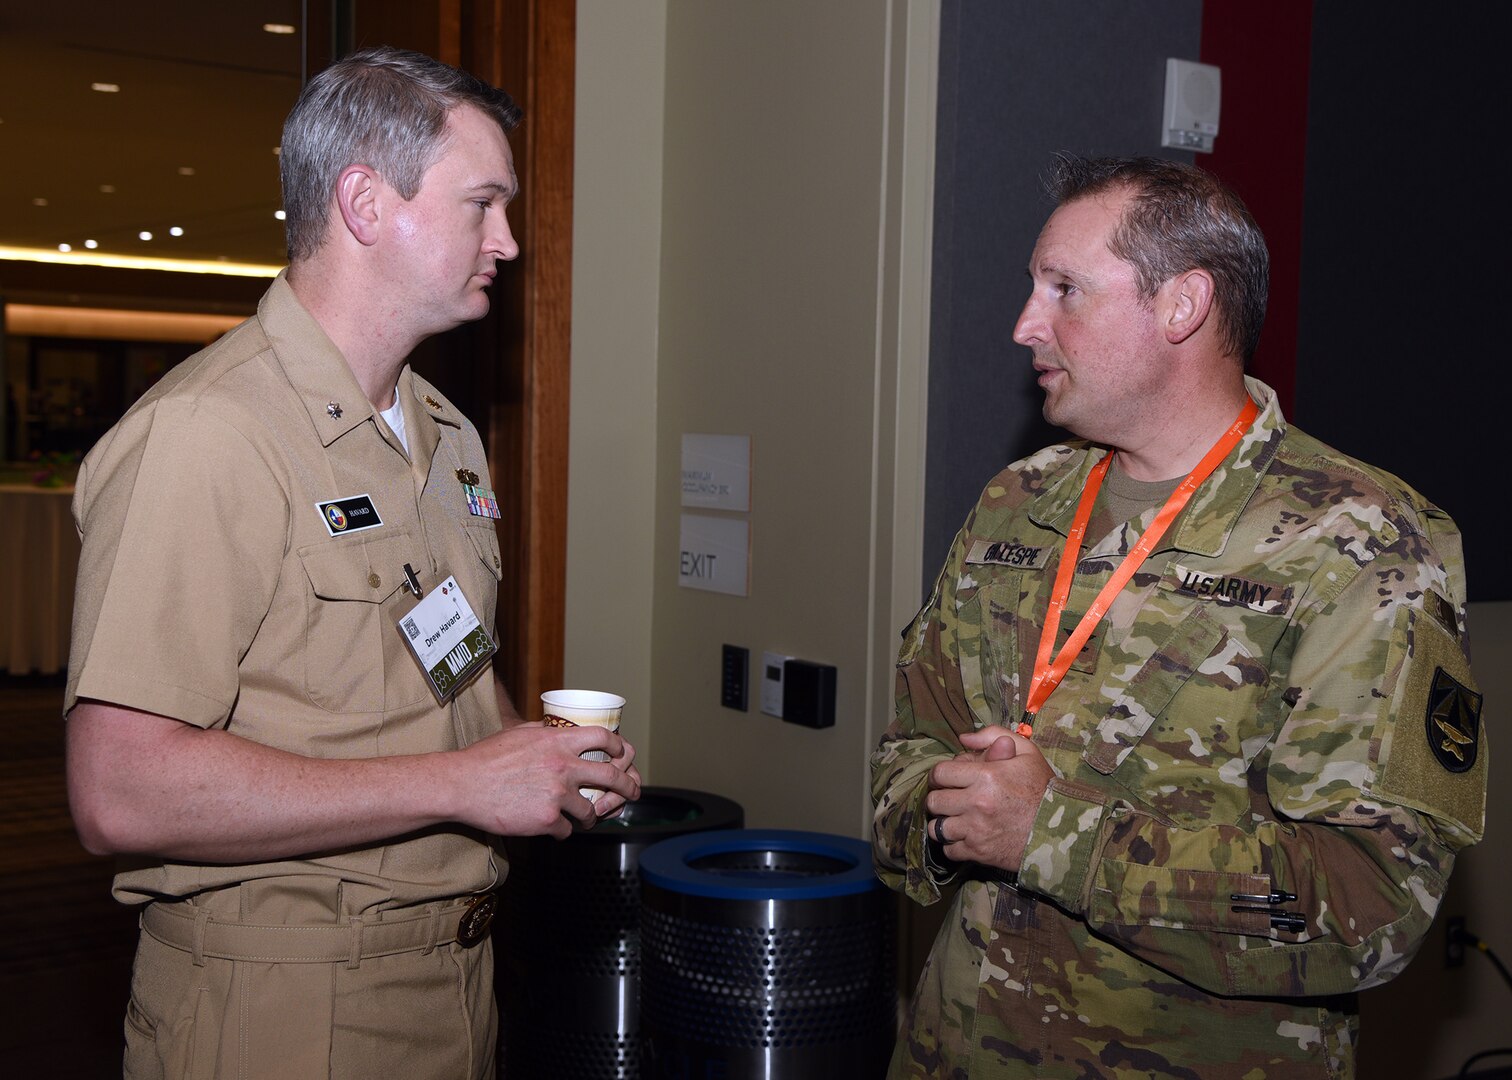 SAN ANTONIO - (May 2, 2023) – Cmdr. Drew Havard, Naval Medical Research Unit (NAMRU) San Antonio’s deputy director for Craniofacial and Restorative Medicine, speaks with U.S. Army Col. Kevin Gillespie at the 4th Military Medical Industry Day (MMID) hosted by VelocityTX, a subsidiary of Texas Research & Technology Foundation, the City of San Antonio, and Bexar County at the Henry B. Gonzalez Convention Center.  Attendees heard welcoming remarks from Mayor Ron Nirenberg, keynote address by Dr. Sean Biggerstaff, acting deputy assistant director, Research and Engineering, Defense Health Agency (DHA) along with various panels, to include but not limited to, “What the Military Wants” and “Military Medical Research and Development (R&D) Funding.”  The MMID provides a platform for innovators and entrepreneurs to learn about military medical requirements, available funding sources to support R&D, and ways to work with the military. NAMRU San Antonio’s mission is to conduct gap driven combat casualty care, craniofacial, and directed energy research to improve survival, operational readiness, and safety of Department of Defense (DoD) personnel engaged in routine and expeditionary operations. It is one of the leading research and development laboratories for the U.S. Navy under the DoD and is one of eight subordinate research commands in the global network of laboratories operating under Naval Medical Research Command (NMRC) in Silver Spring, Md. (U.S. Navy photo by Burrell Parmer, NAMRU San Antonio Public Affairs/Released)